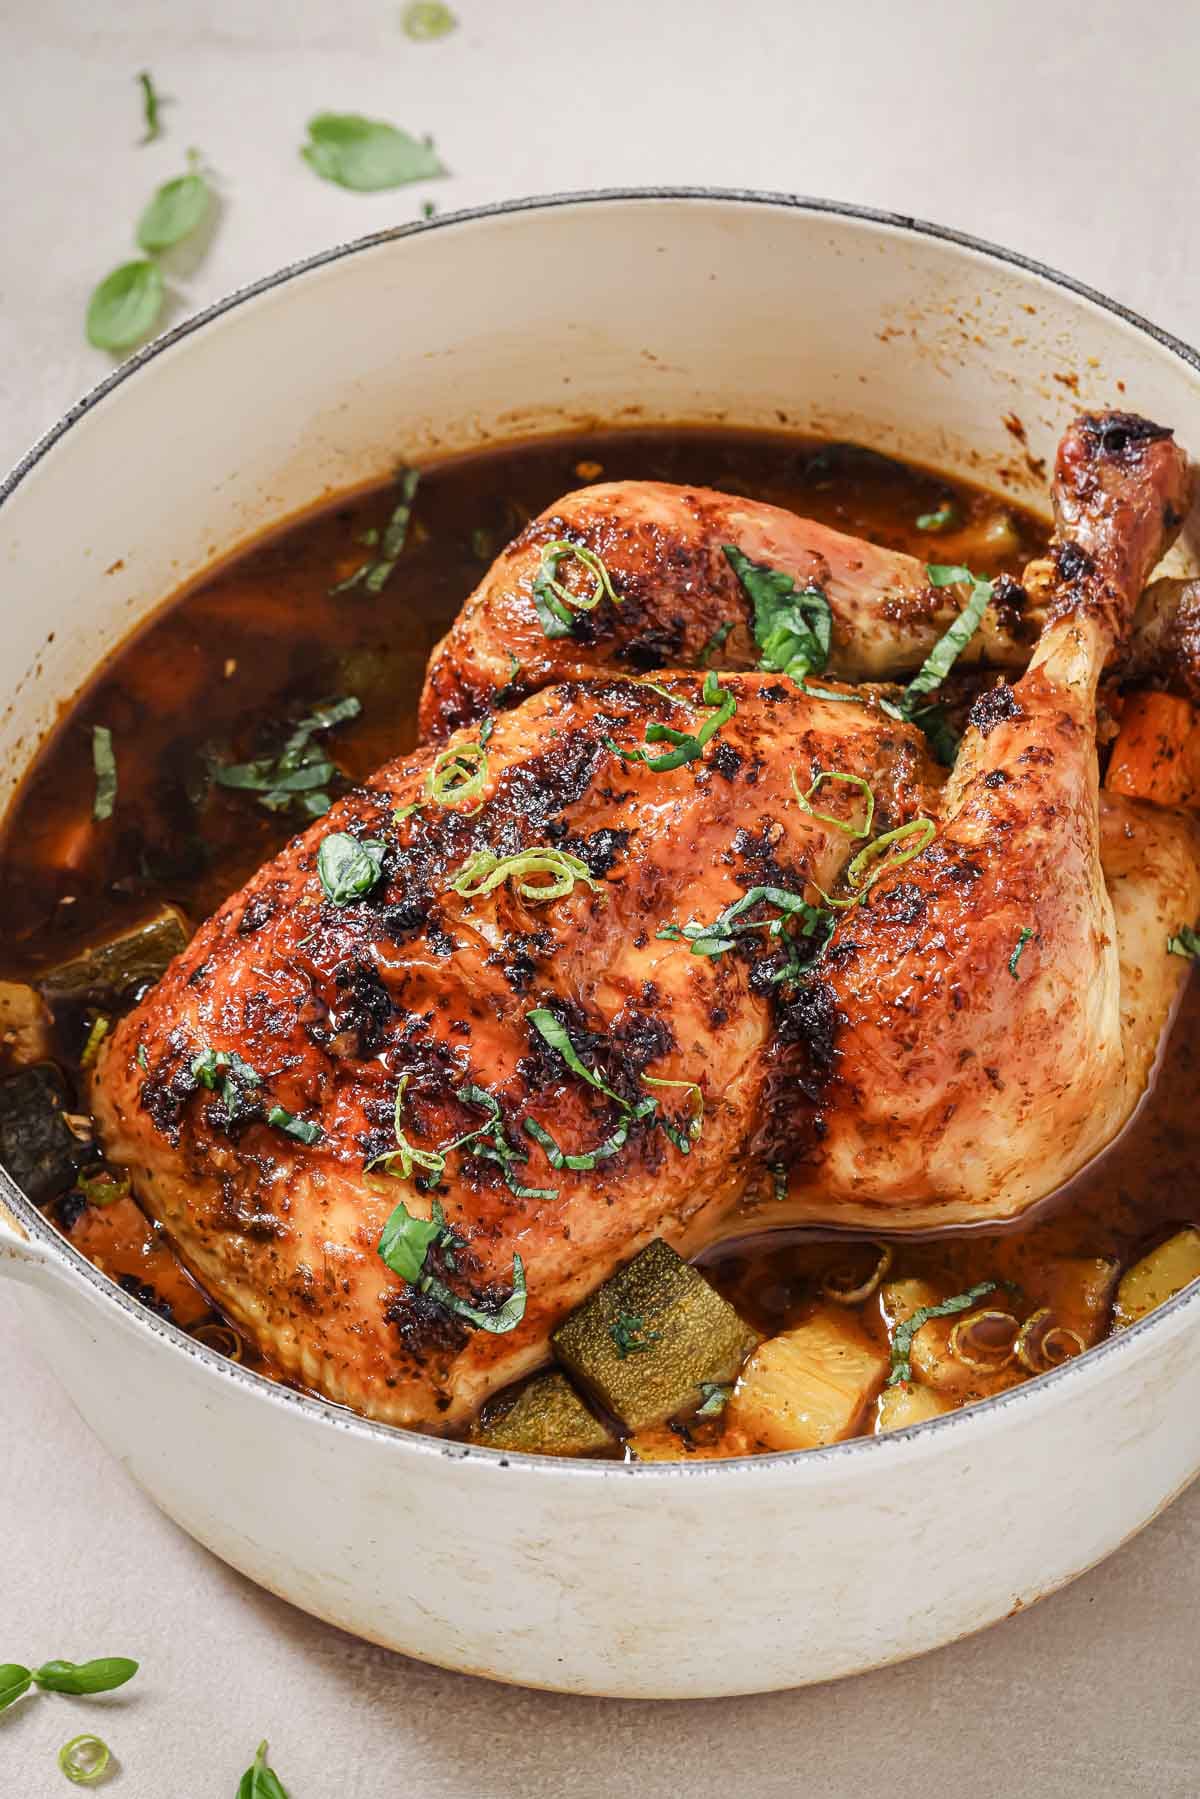 https://iheartumami.com/wp-content/uploads/2017/12/Dutch-Oven-Whole-Curry-Chicken.jpg